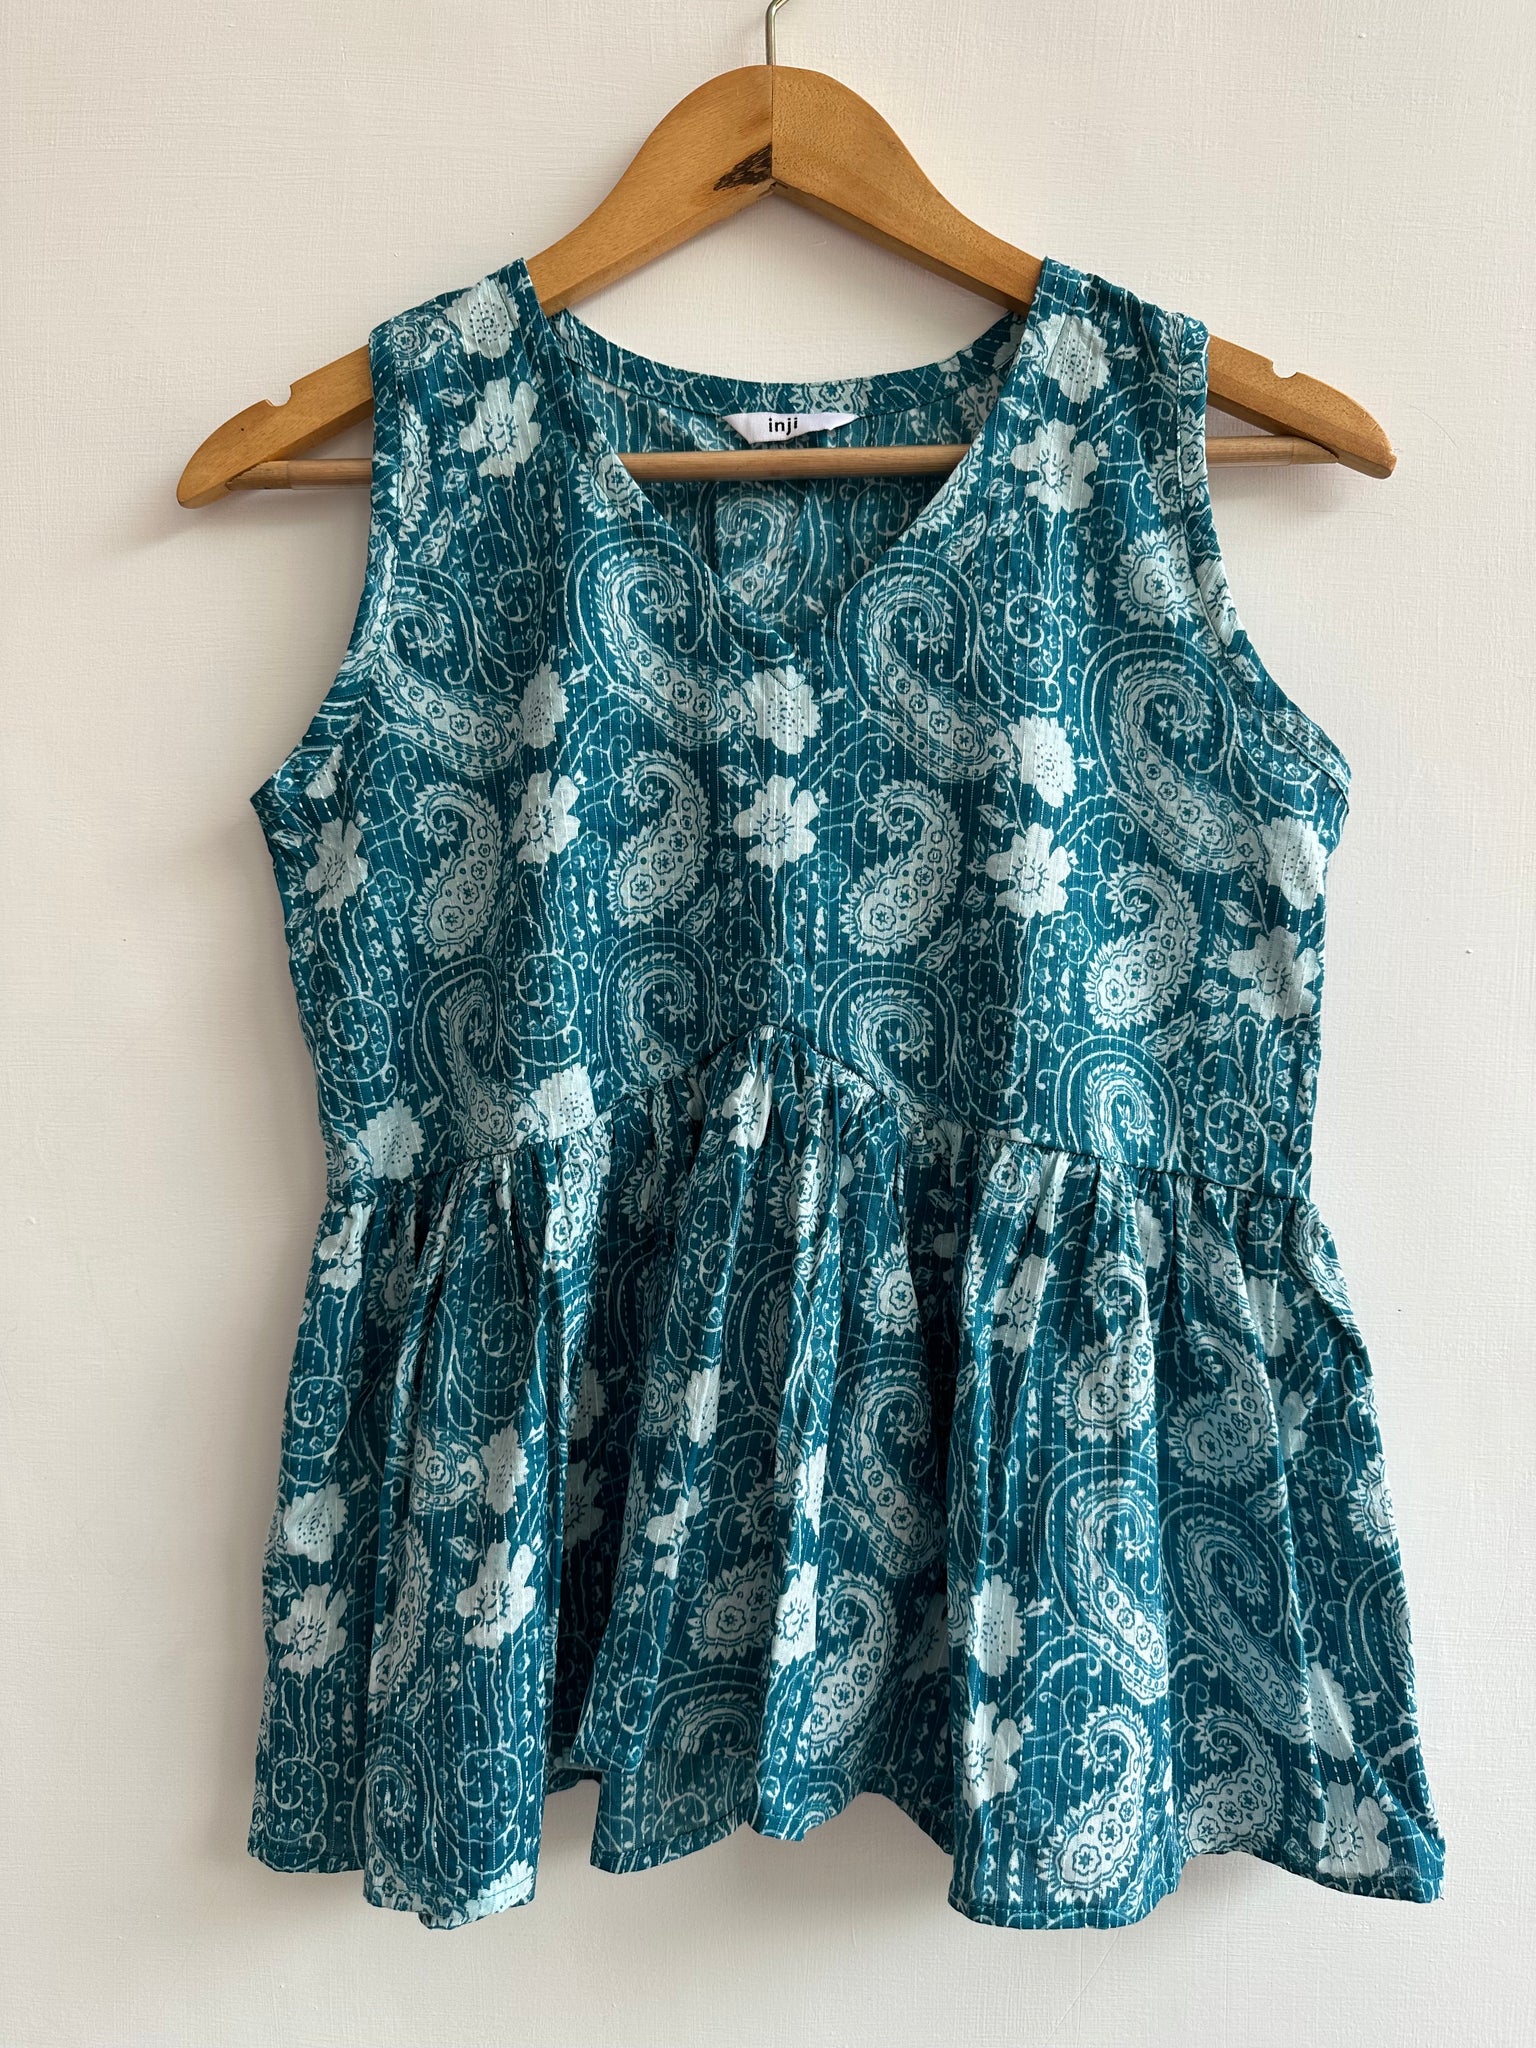 Sleeveless Top in kantha fabric